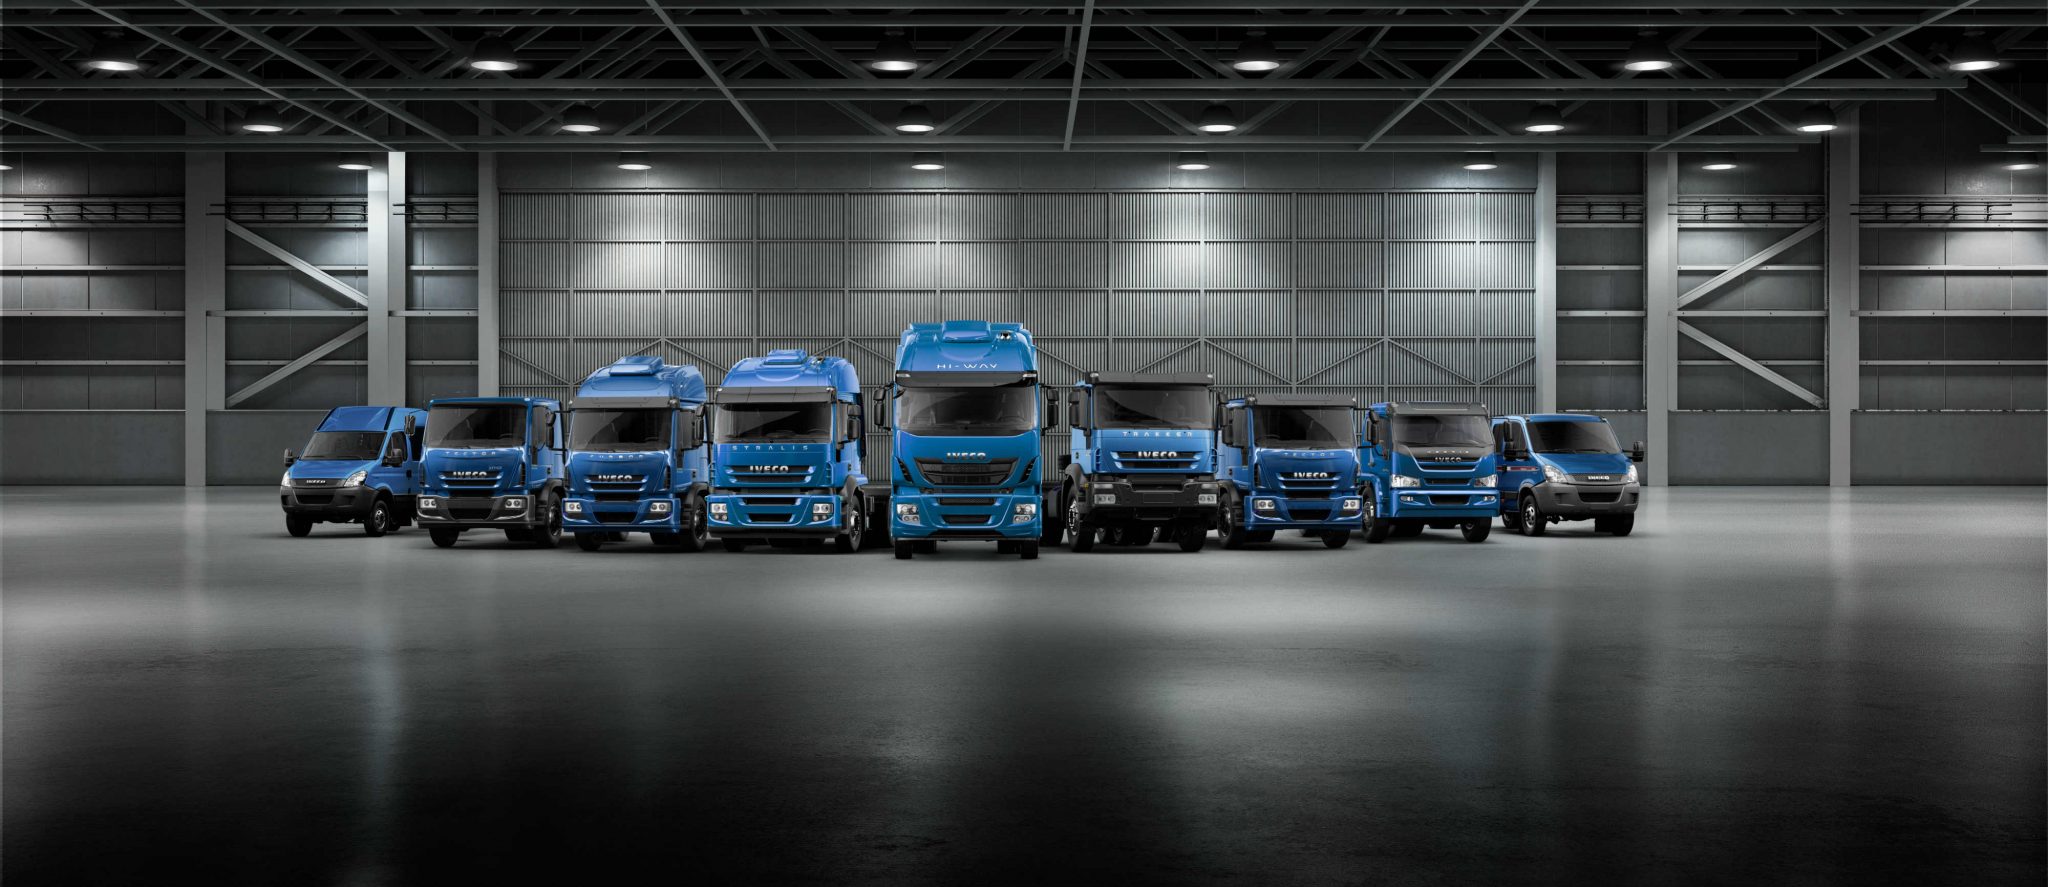 IvecoArgentina